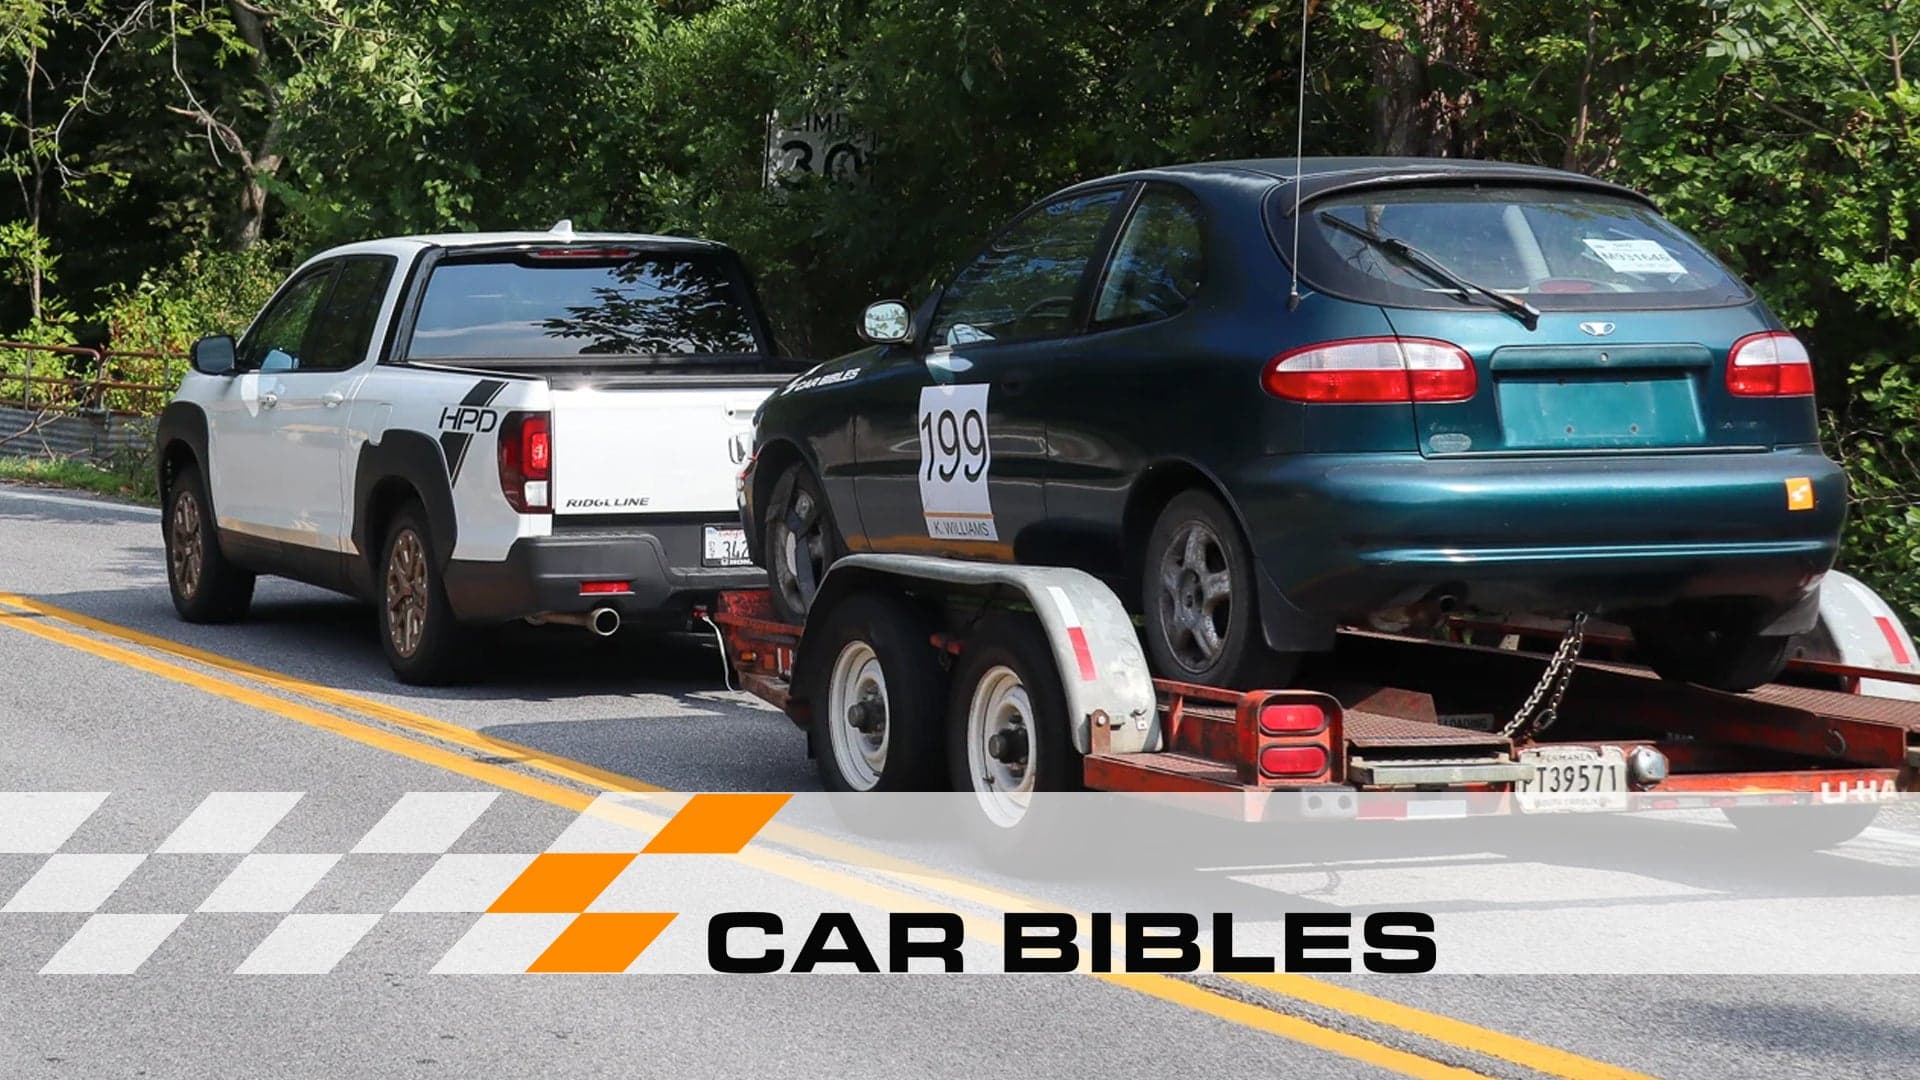 Car Bibles Tested the 2021 Honda Ridgeline’s Towing Limits by Hauling a Daewoo Project Car